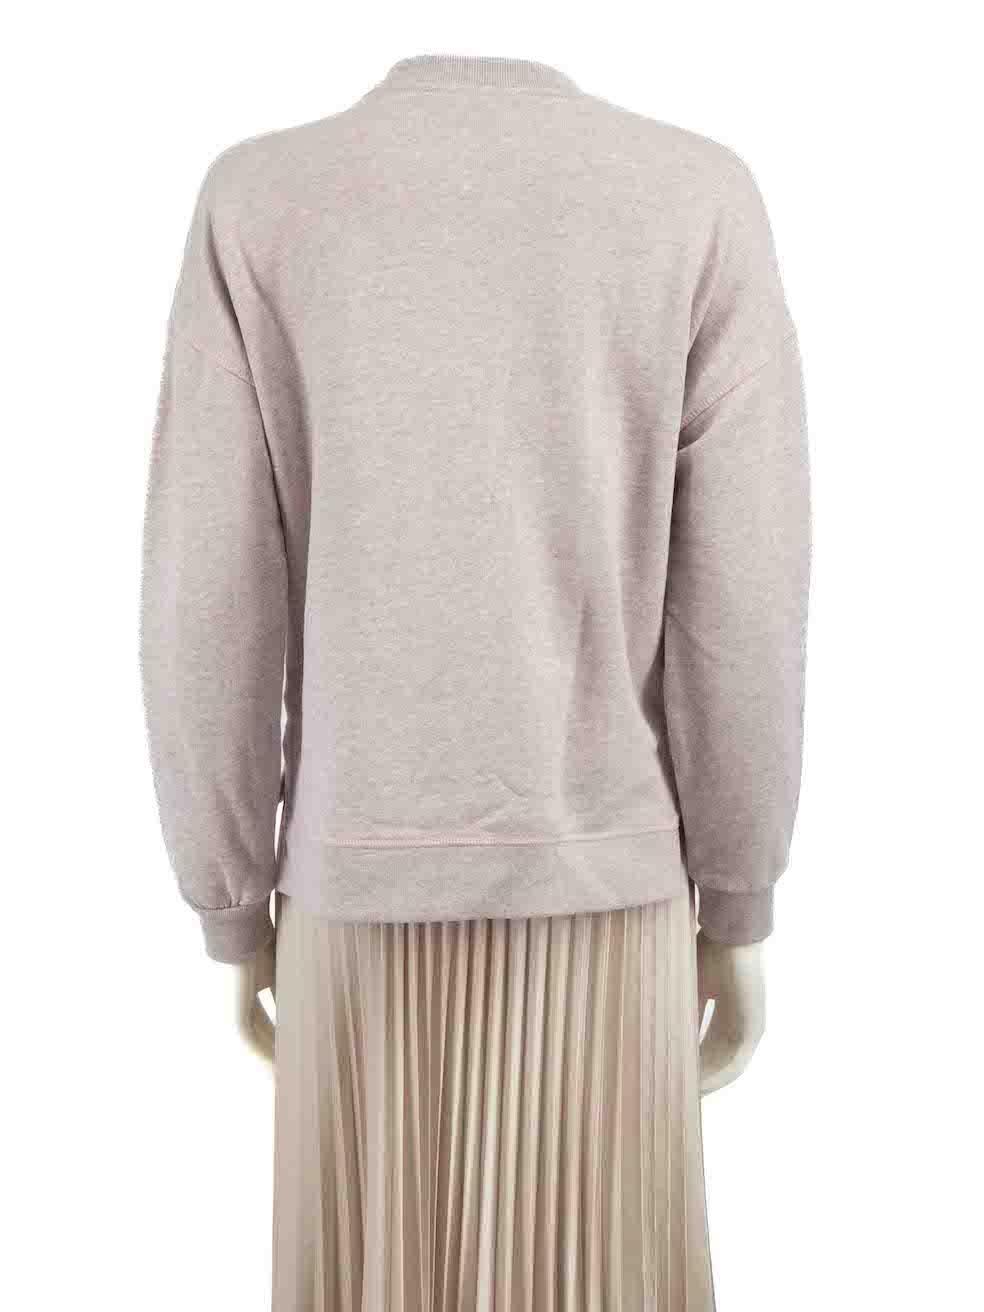 Ganni Light Pink Graphic Print Sweatshirt Size XS In Good Condition For Sale In London, GB